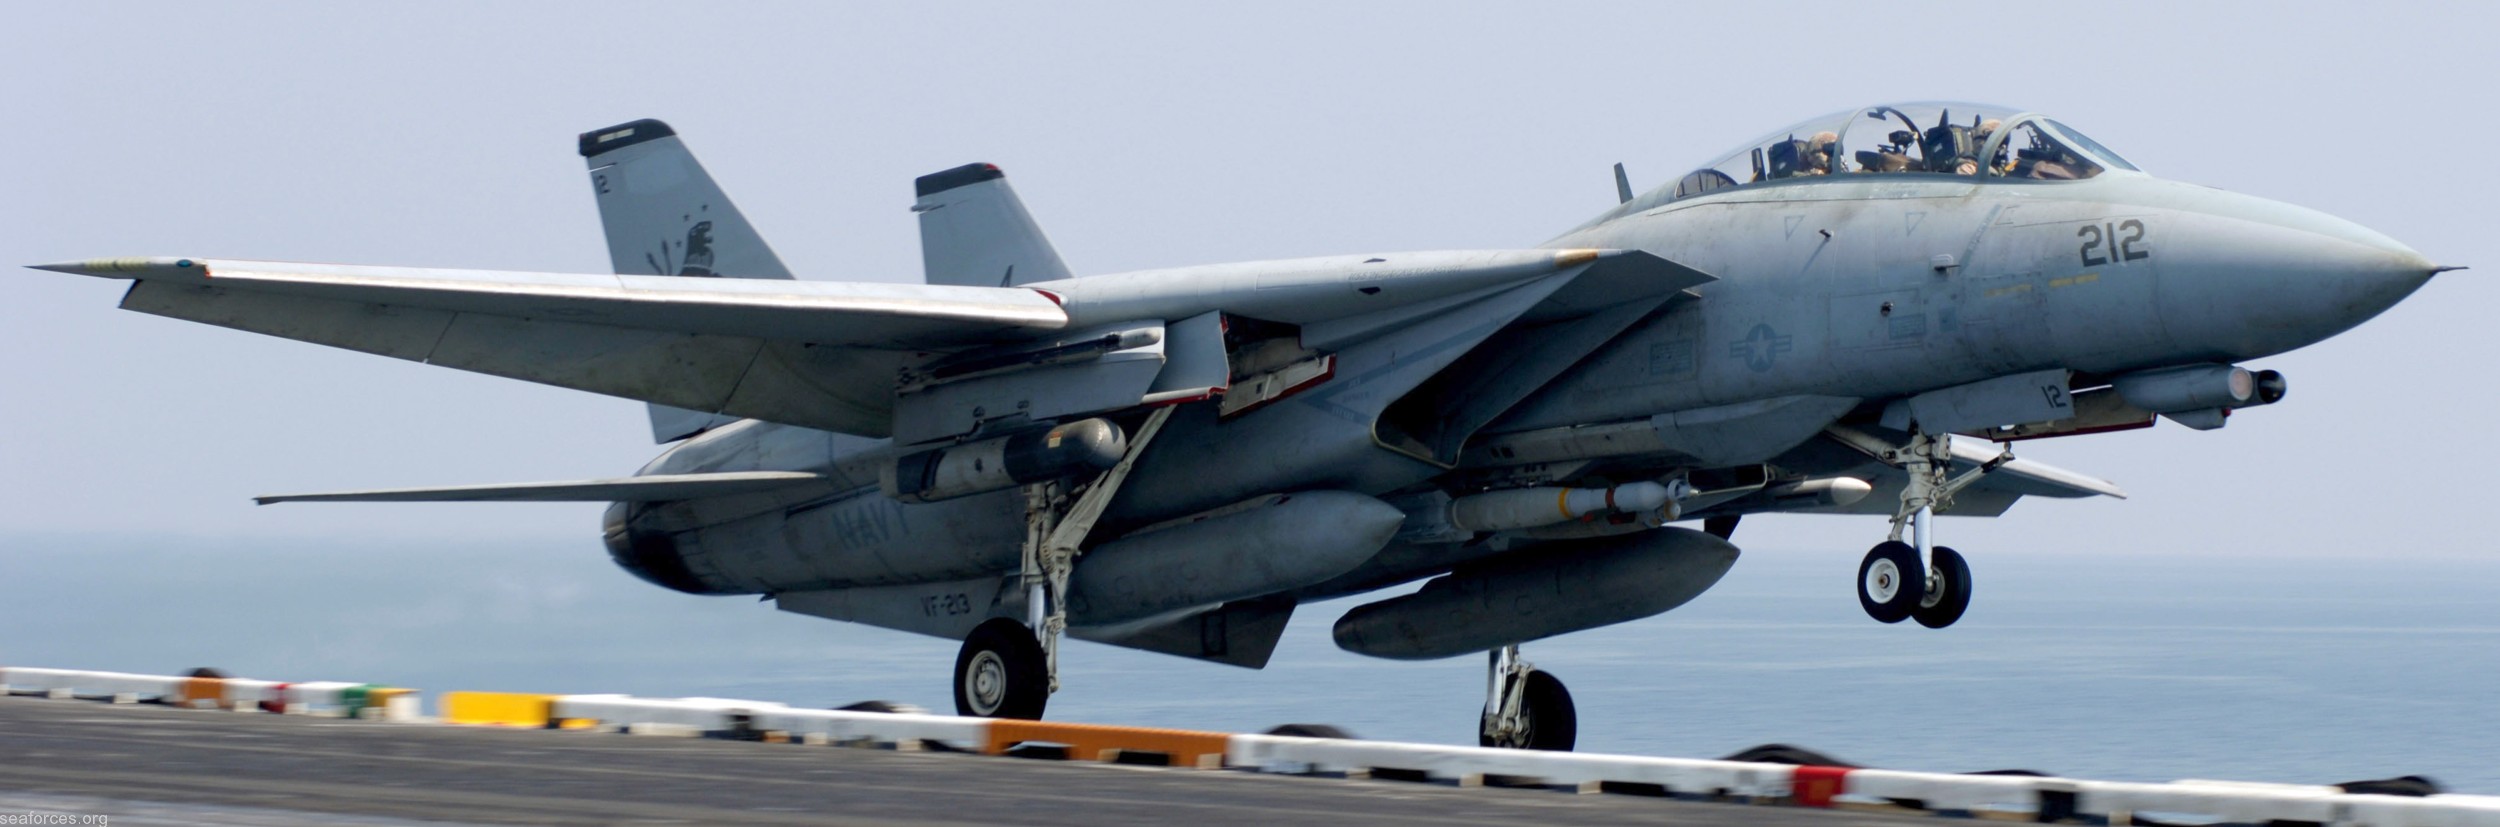 vf-213 black lions fighter squadron us navy f-14d tomcat carrier air wing cvw-8 uss theodore roosevelt cvn-71 38